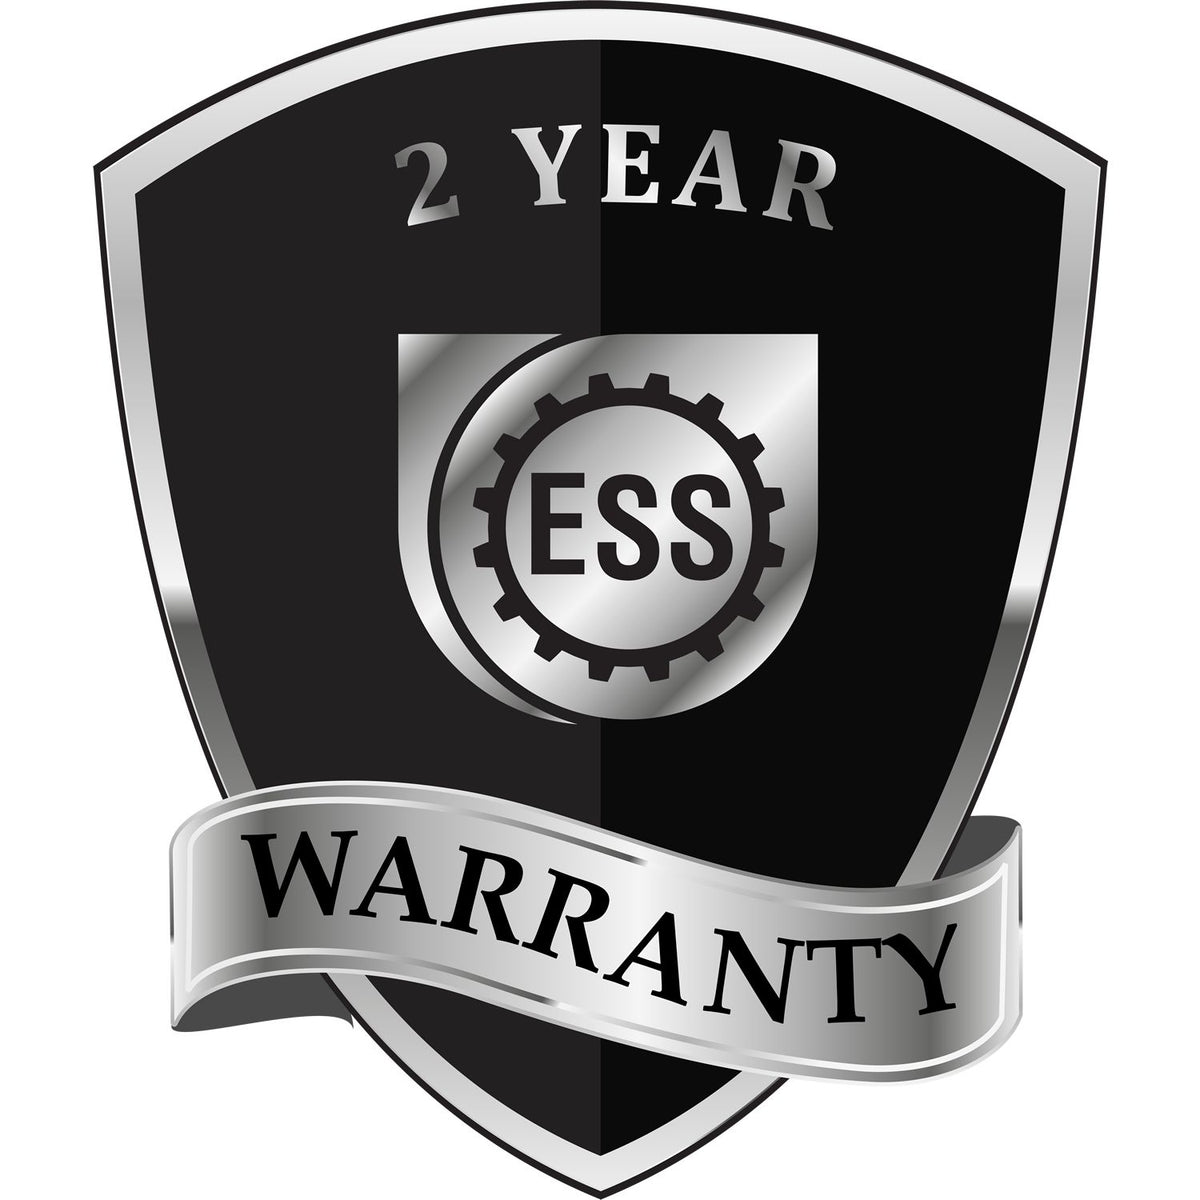 A black and silver badge or emblem showing warranty information for the Gift Montana Landscape Architect Seal